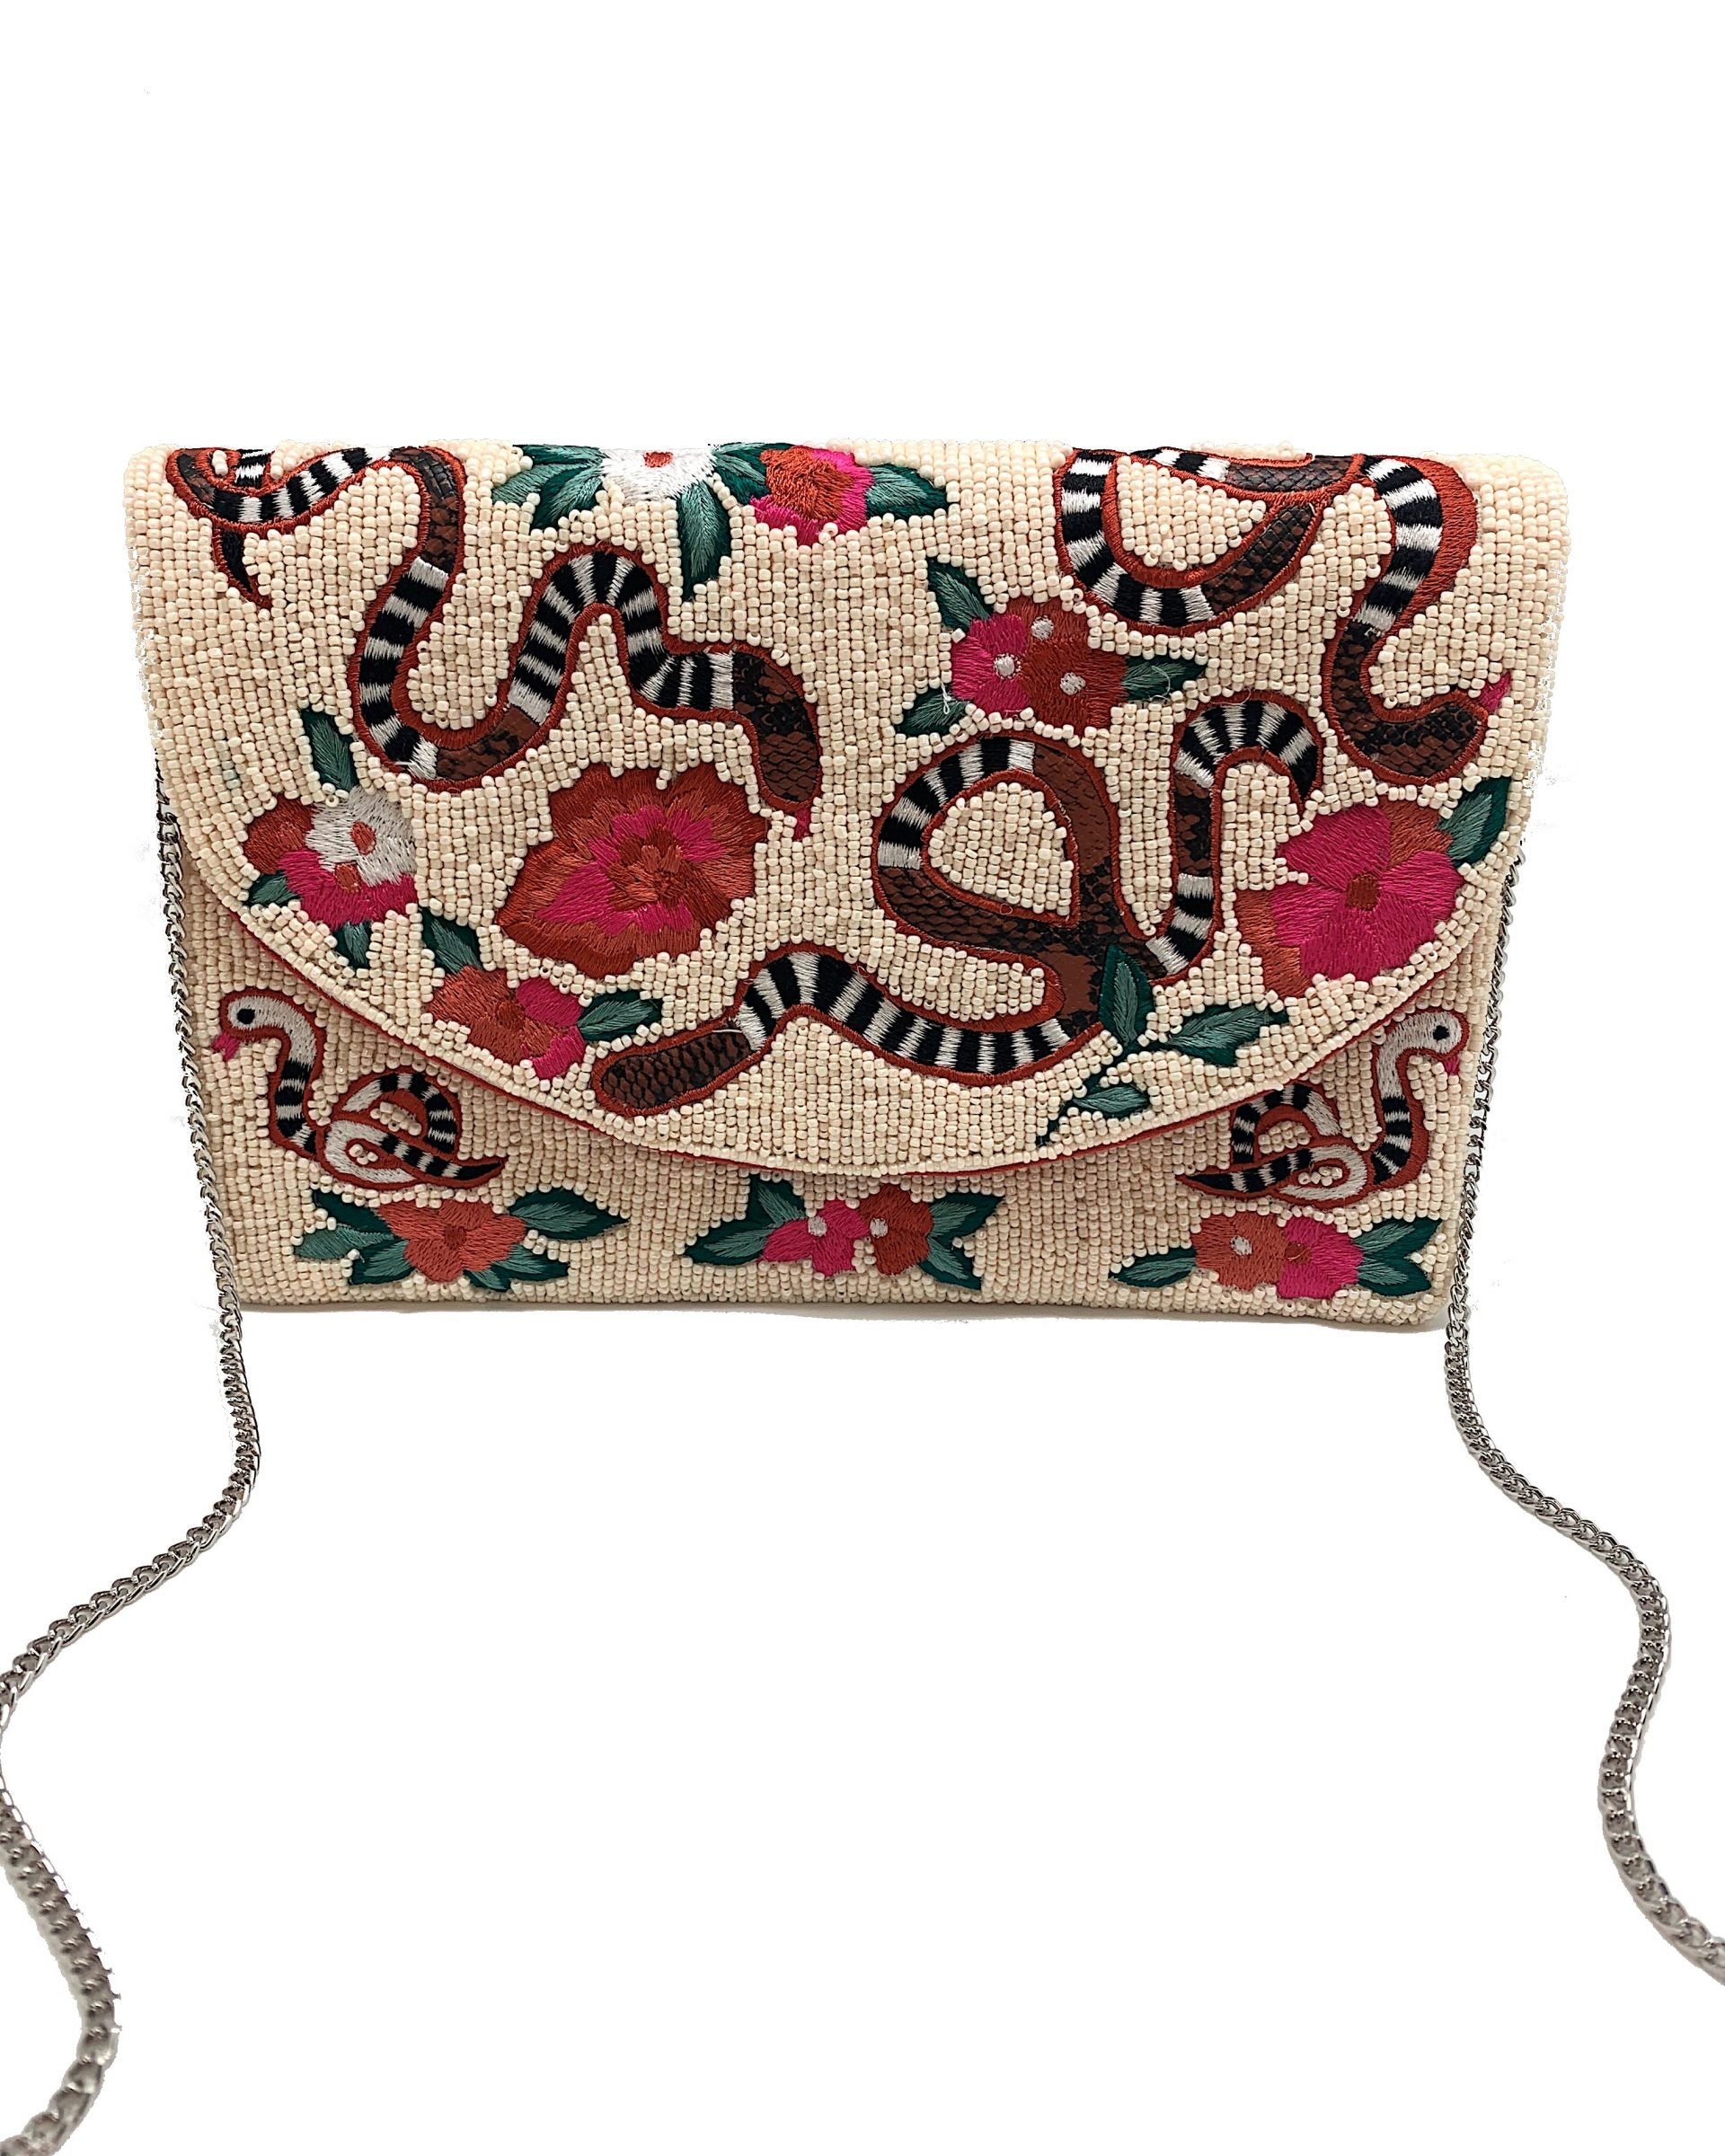 Snake Embroidered & Beaded Clutch.